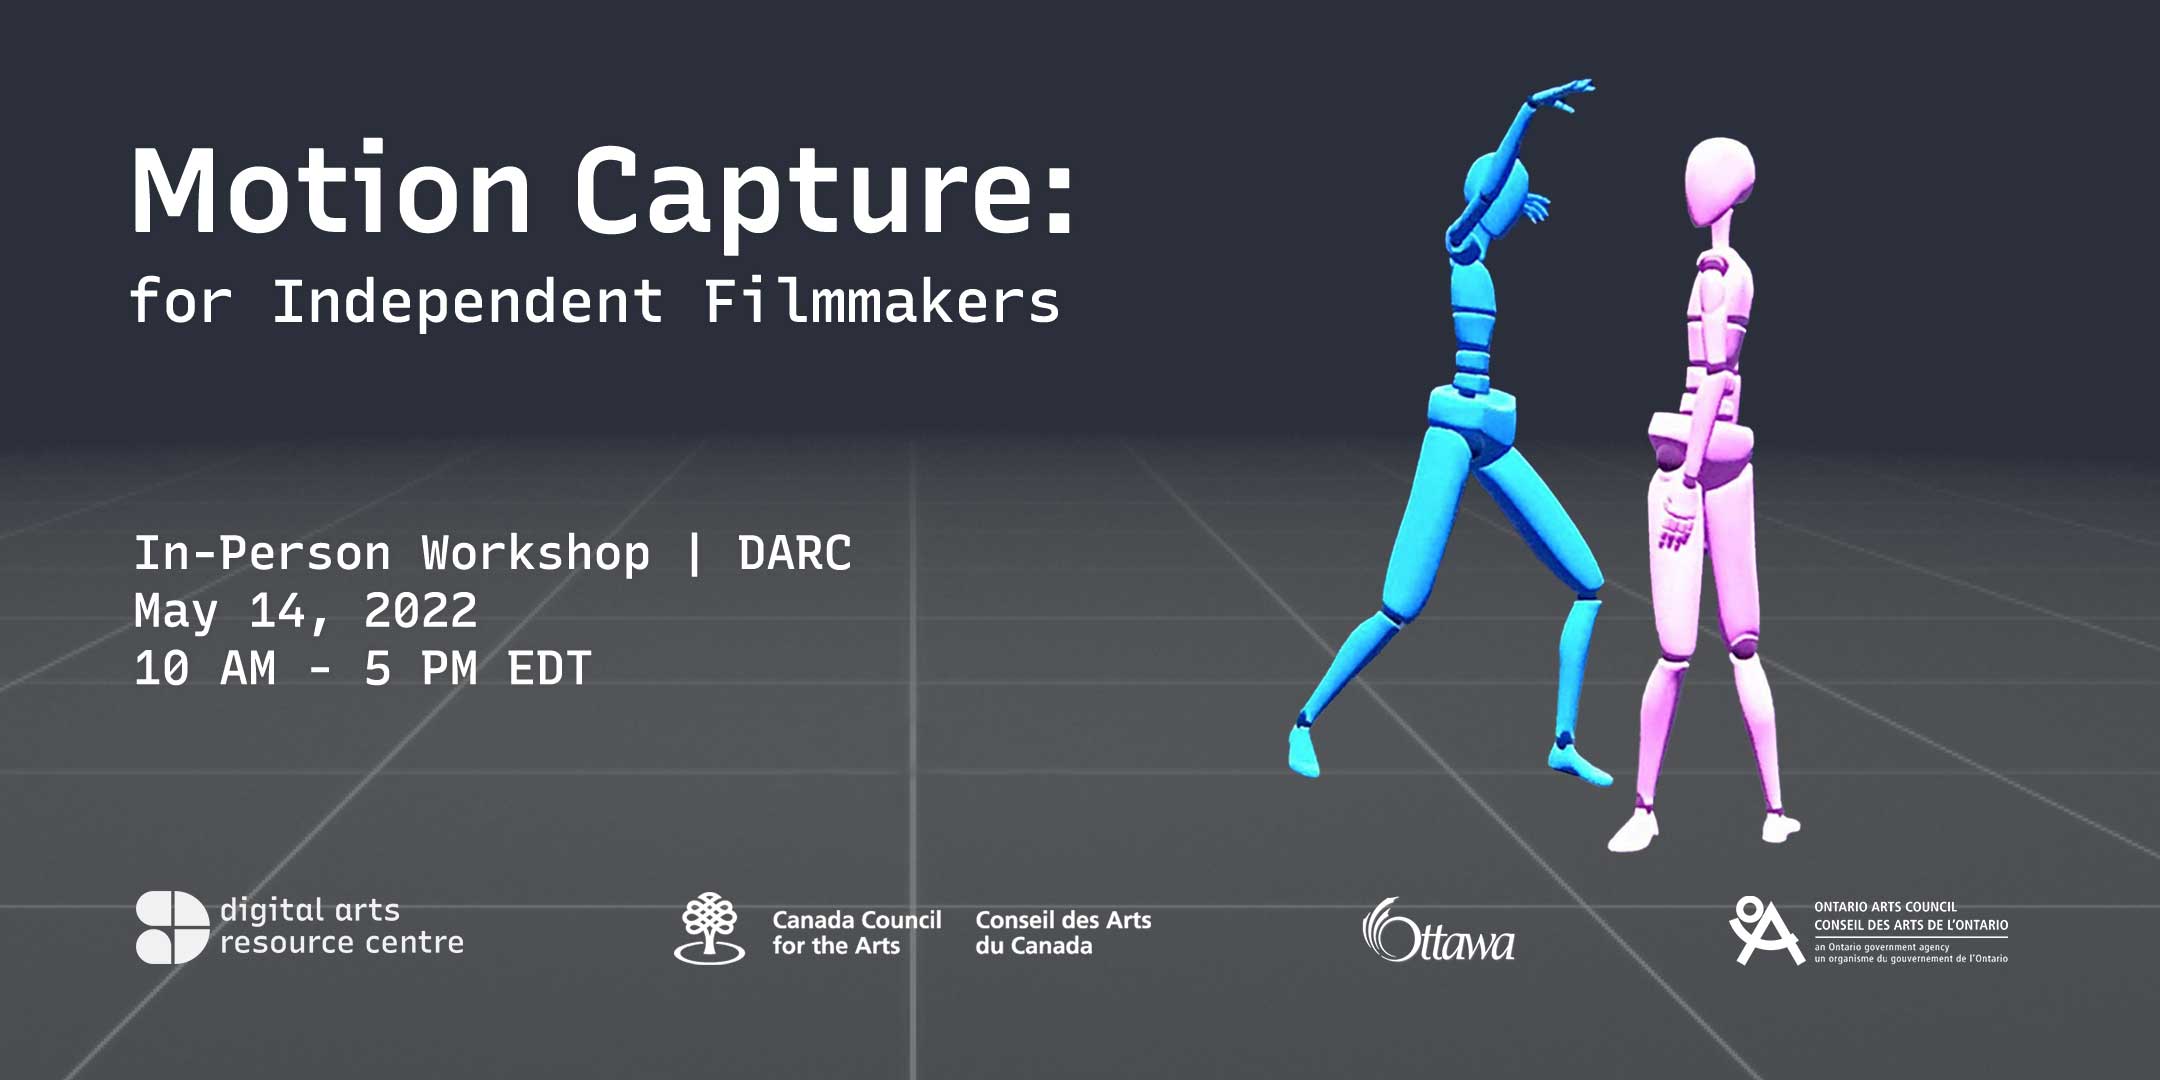 Image of two 3D models dancing alongside one another